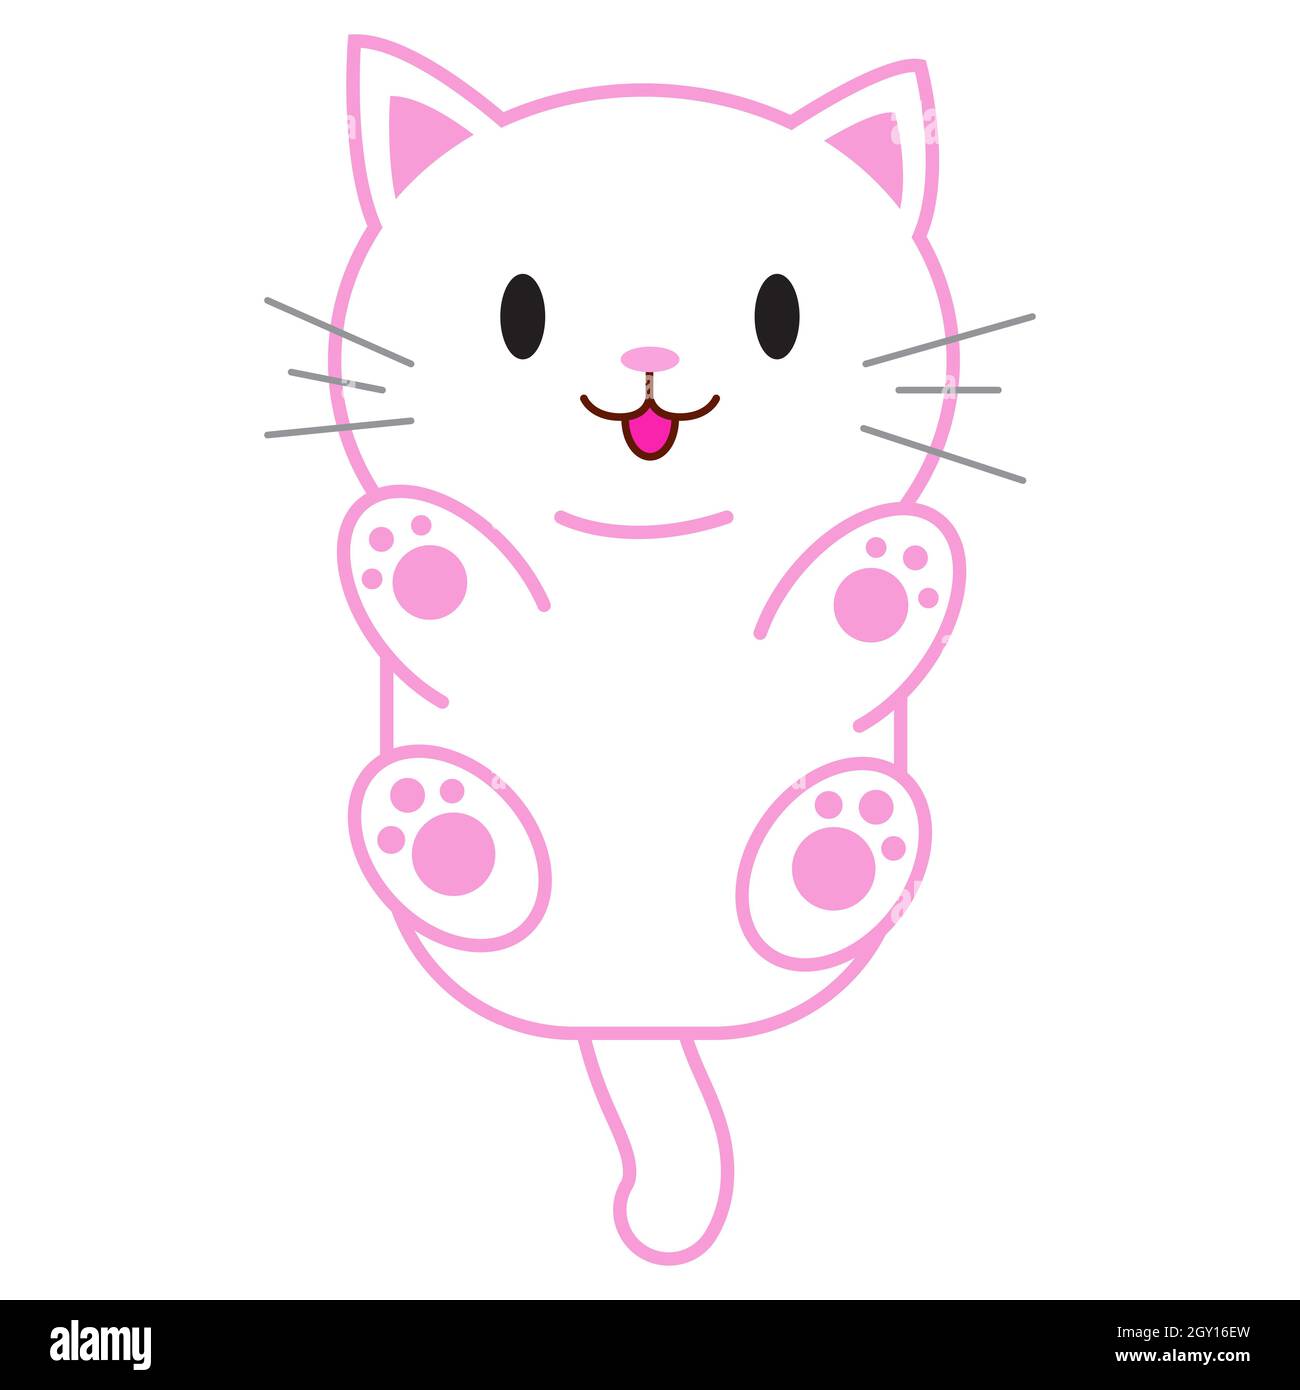 Funny cartoon cat, cute vector illustration in flat style. White and pink cat. Smiling fat kitten. Positive print for sticker, cards, clothes, textile Stock Vector